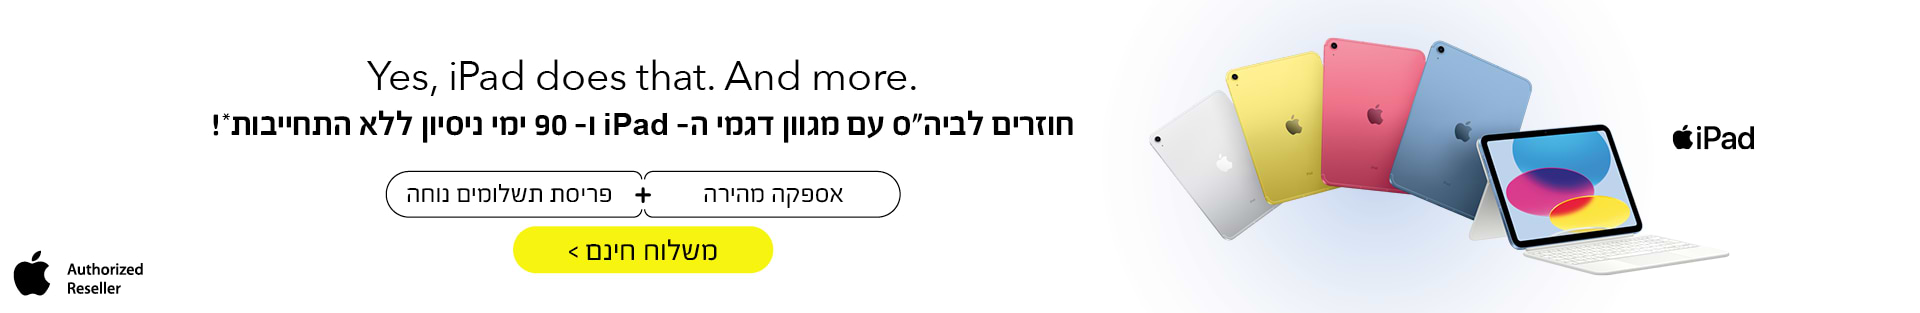 yes, iPad does that. And more. חוזרים לביה